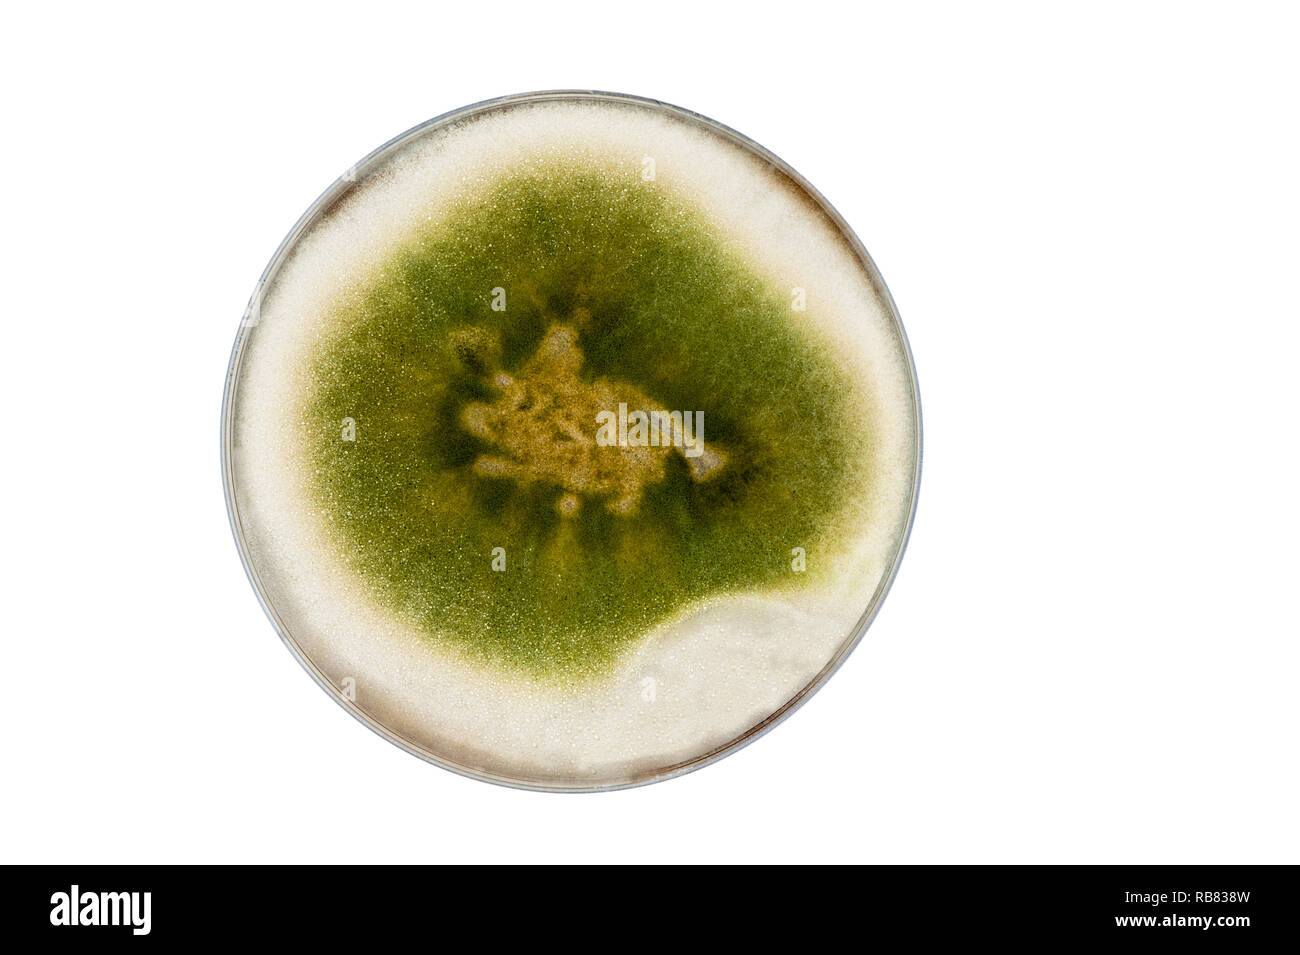 isolated petri dish with green trichoderma mold culture Stock Photo